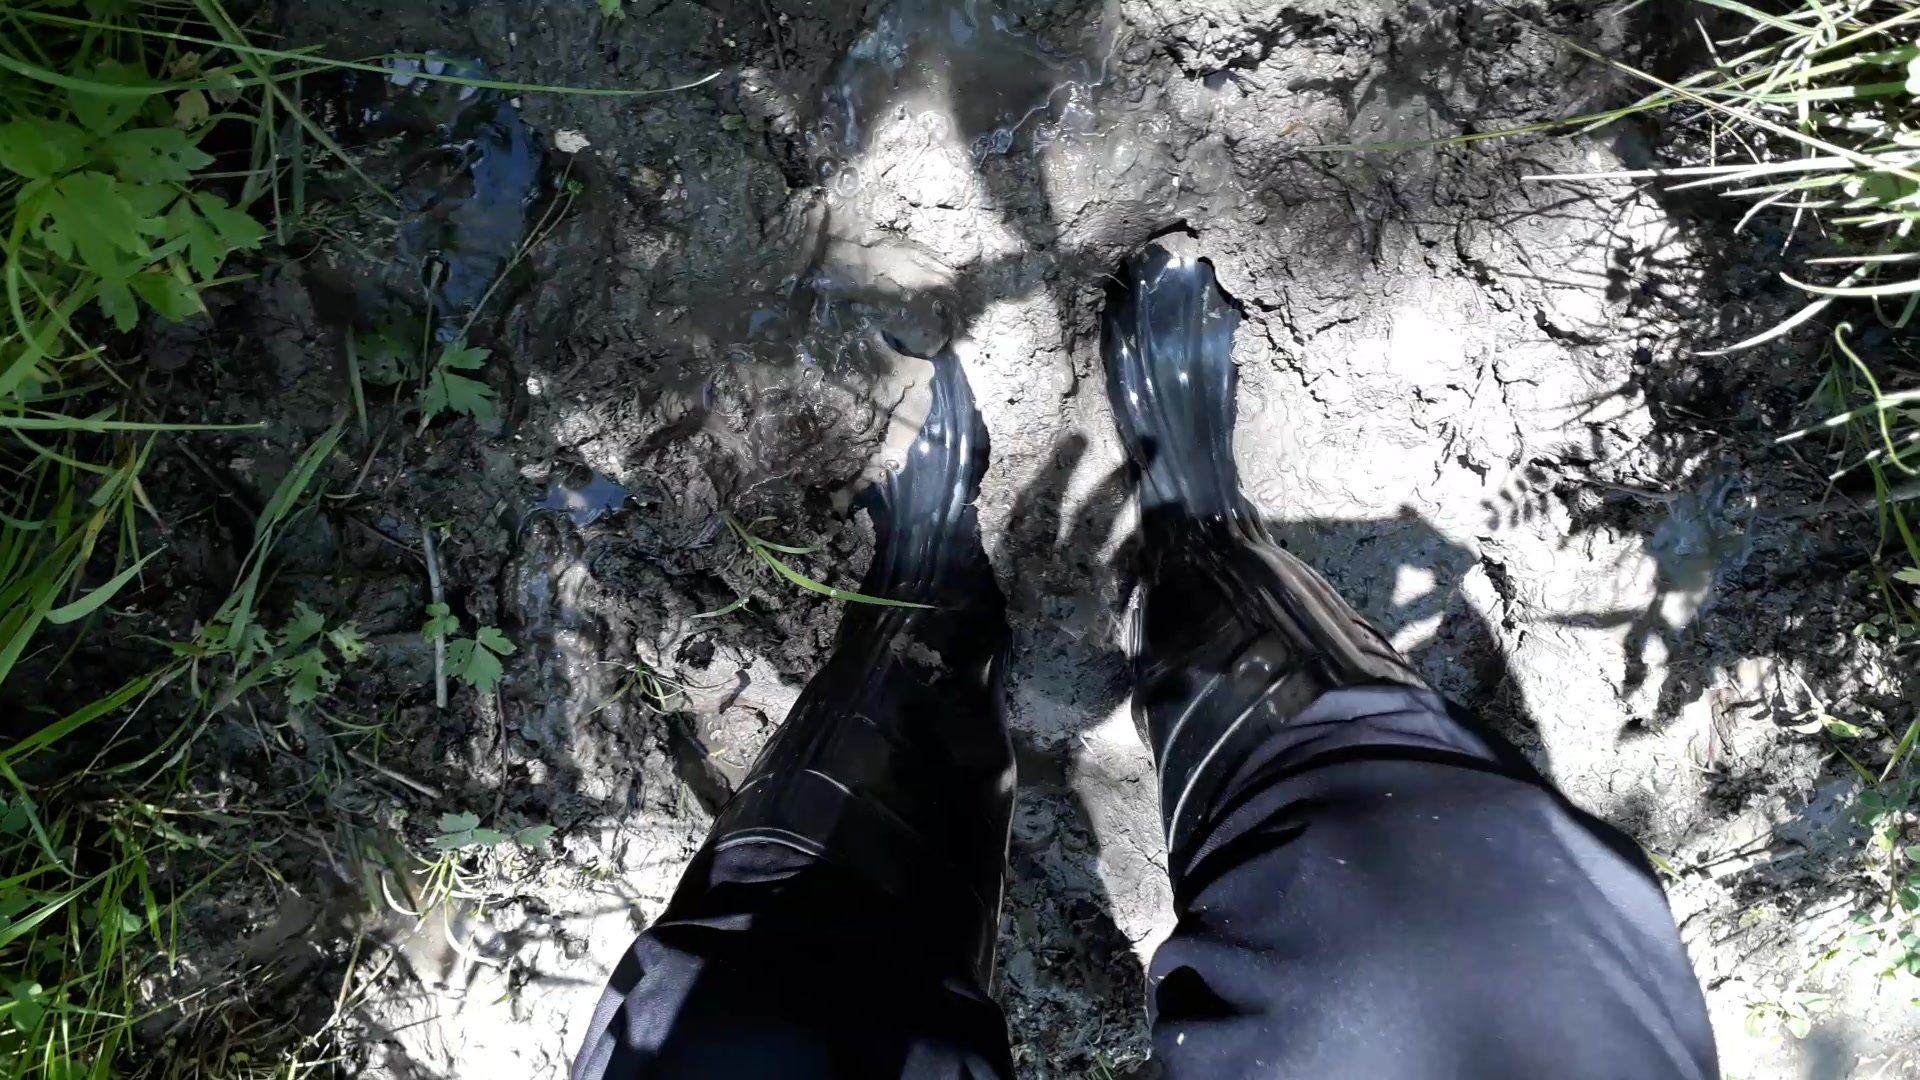 Rubber boots in mud - video 6